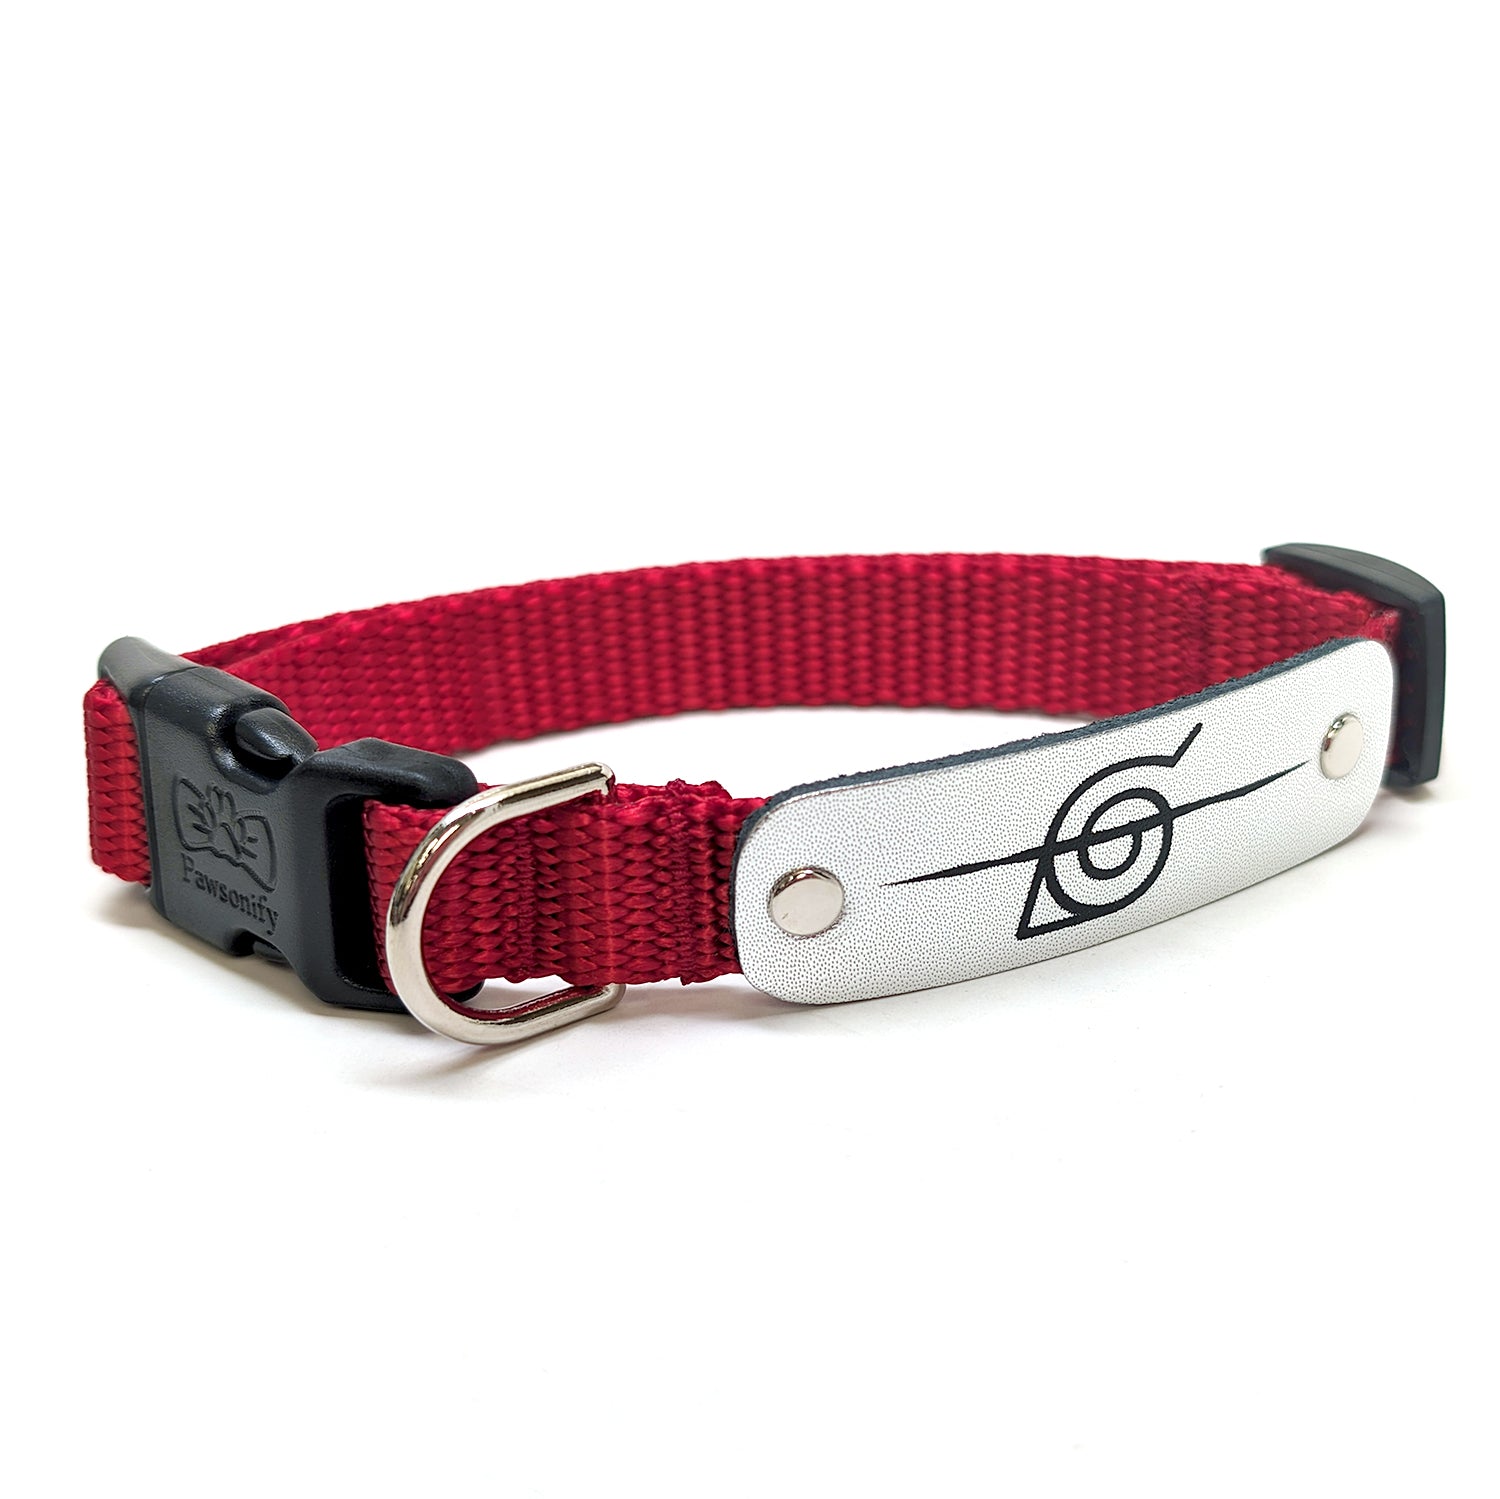 Naruto Shippuden x Pawsonify - Officially Licensed Rogue Ninja  Collar (Red) for Small Dogs #size_Dog: (S) 11-15